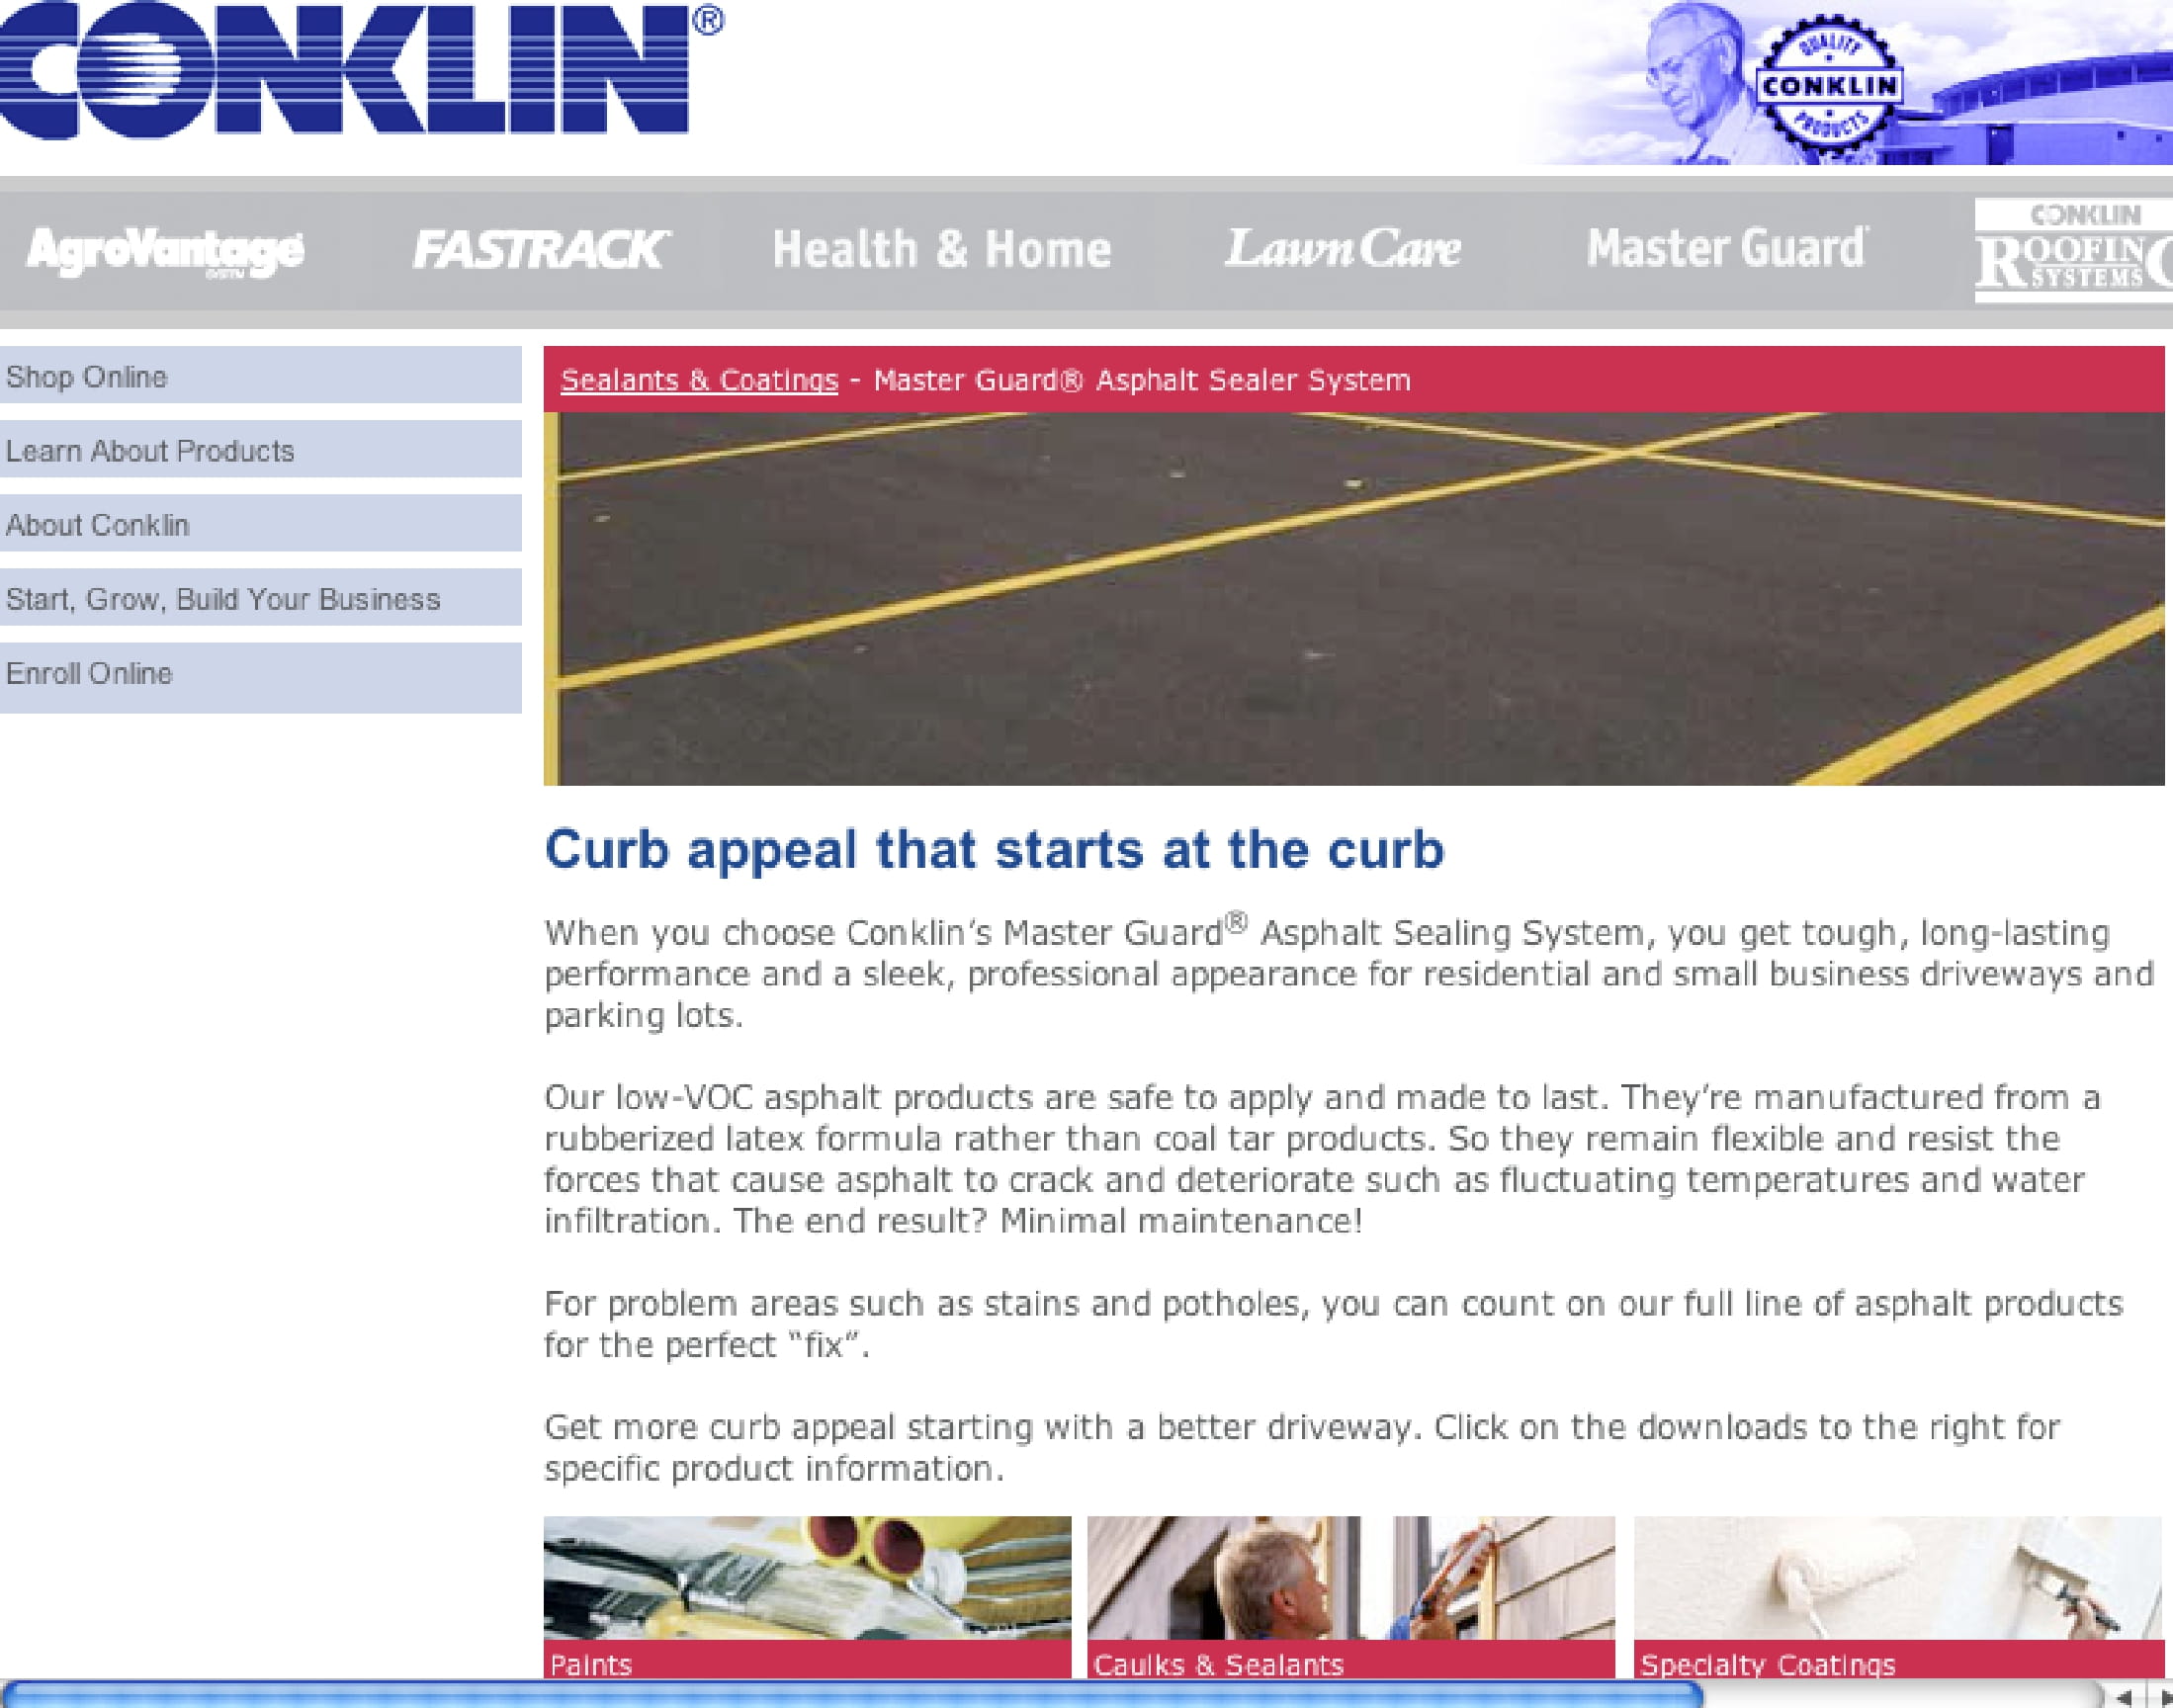 Conklin Painting & Coatings Web Page